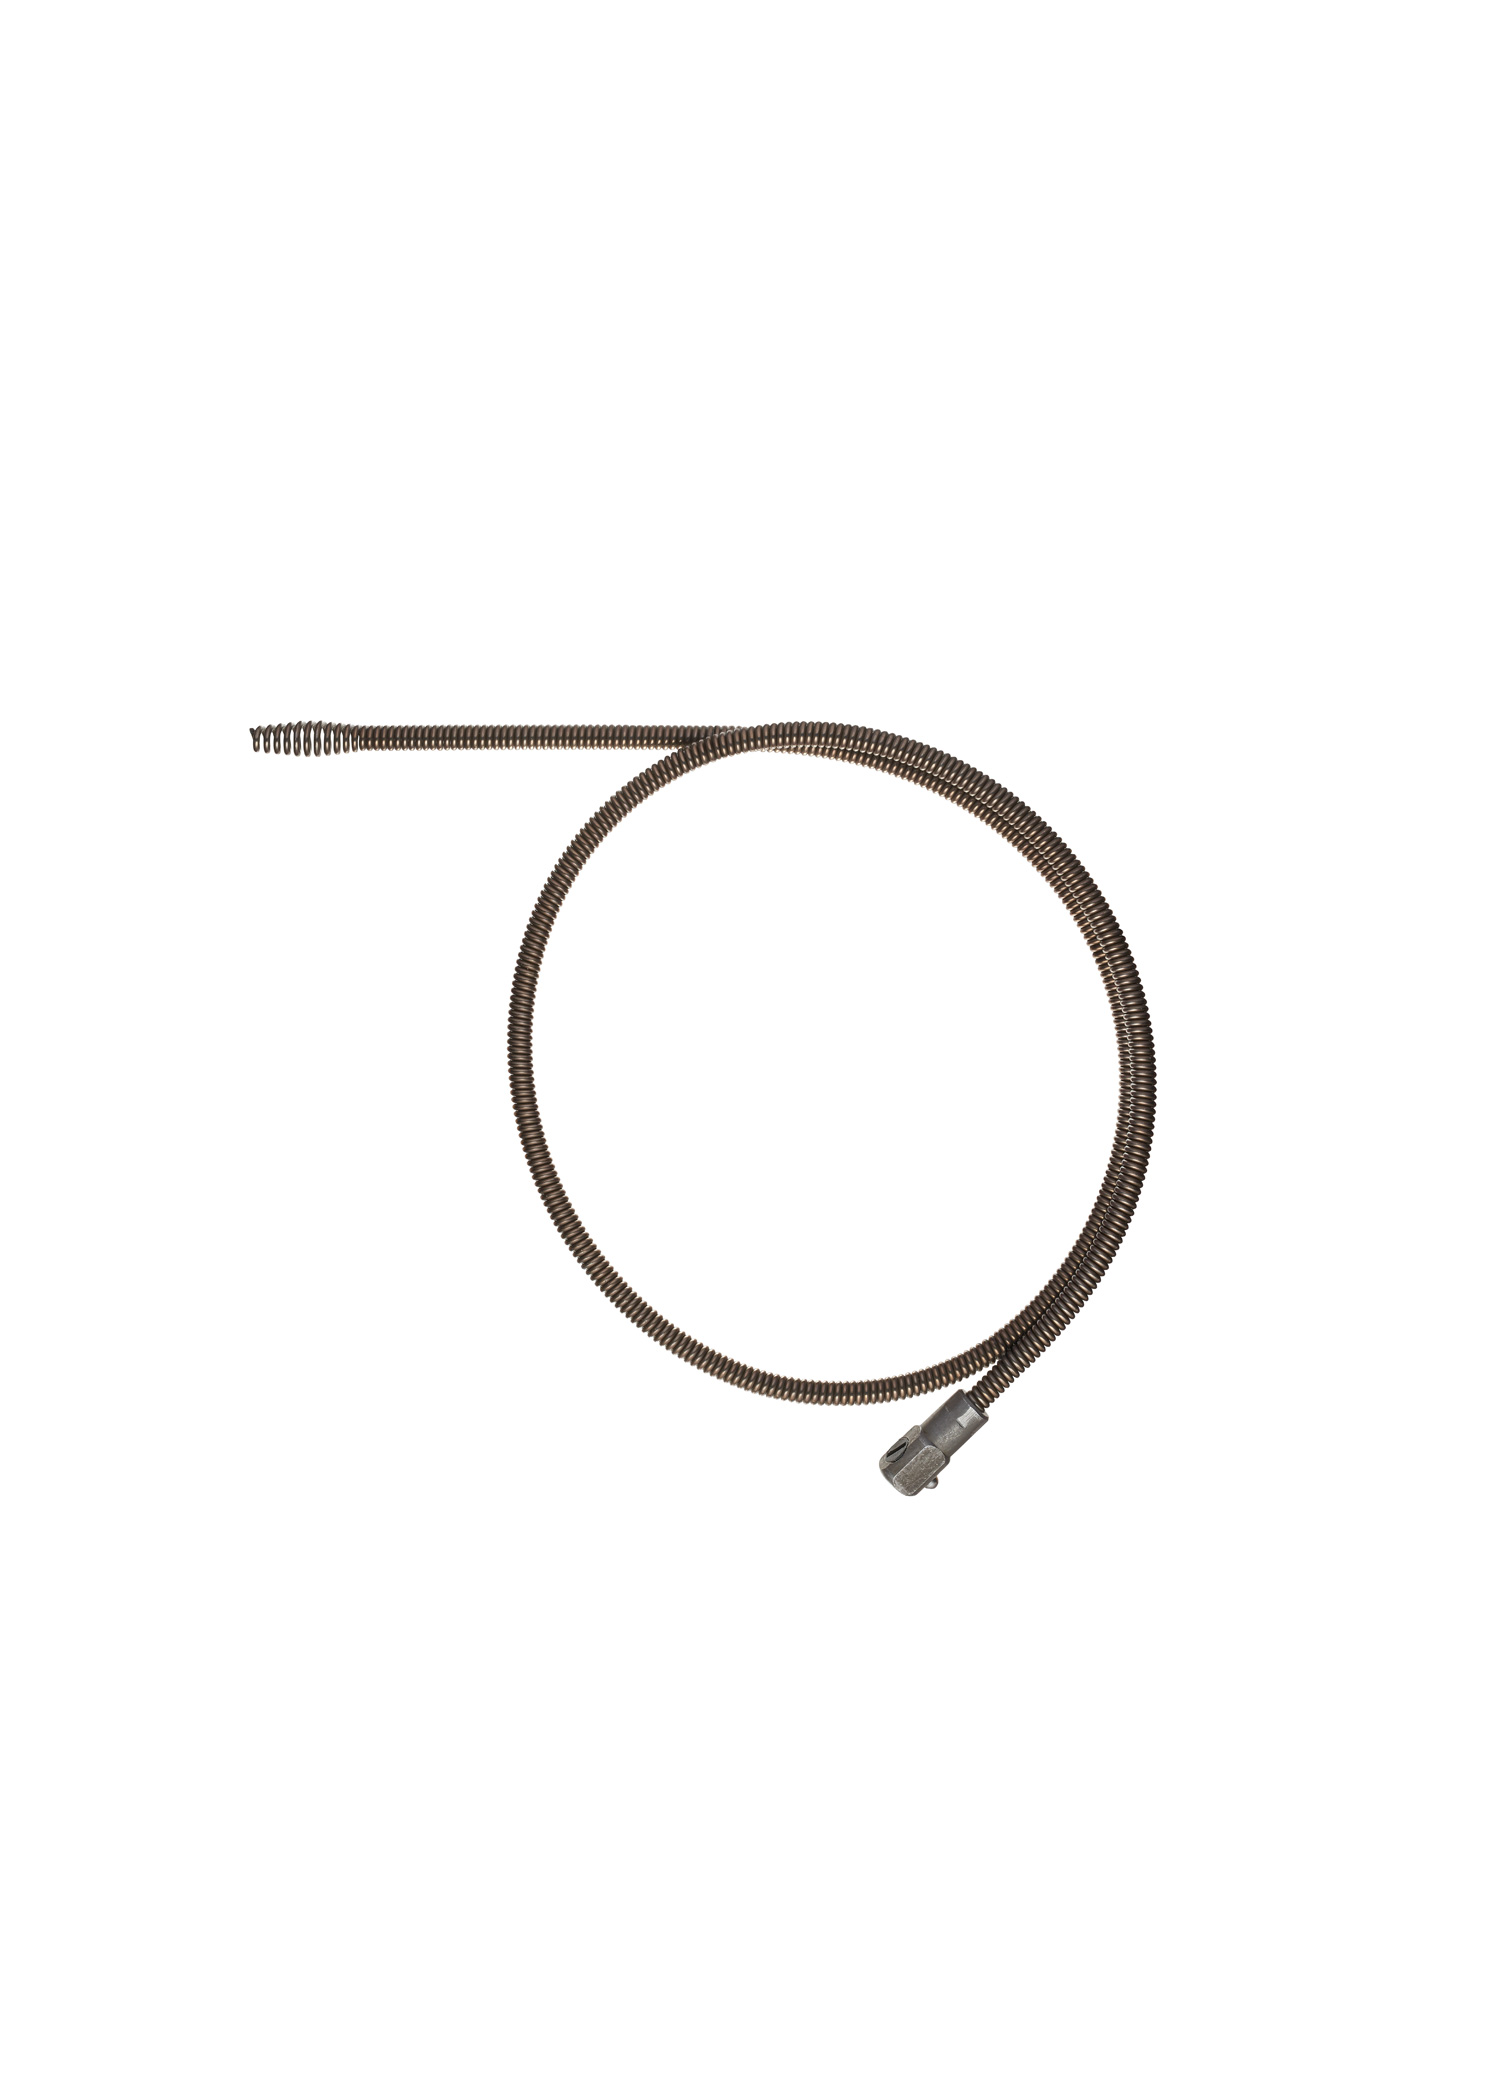 TRAPSNAKE 4 ft. Urinal Auger Replacement Cable